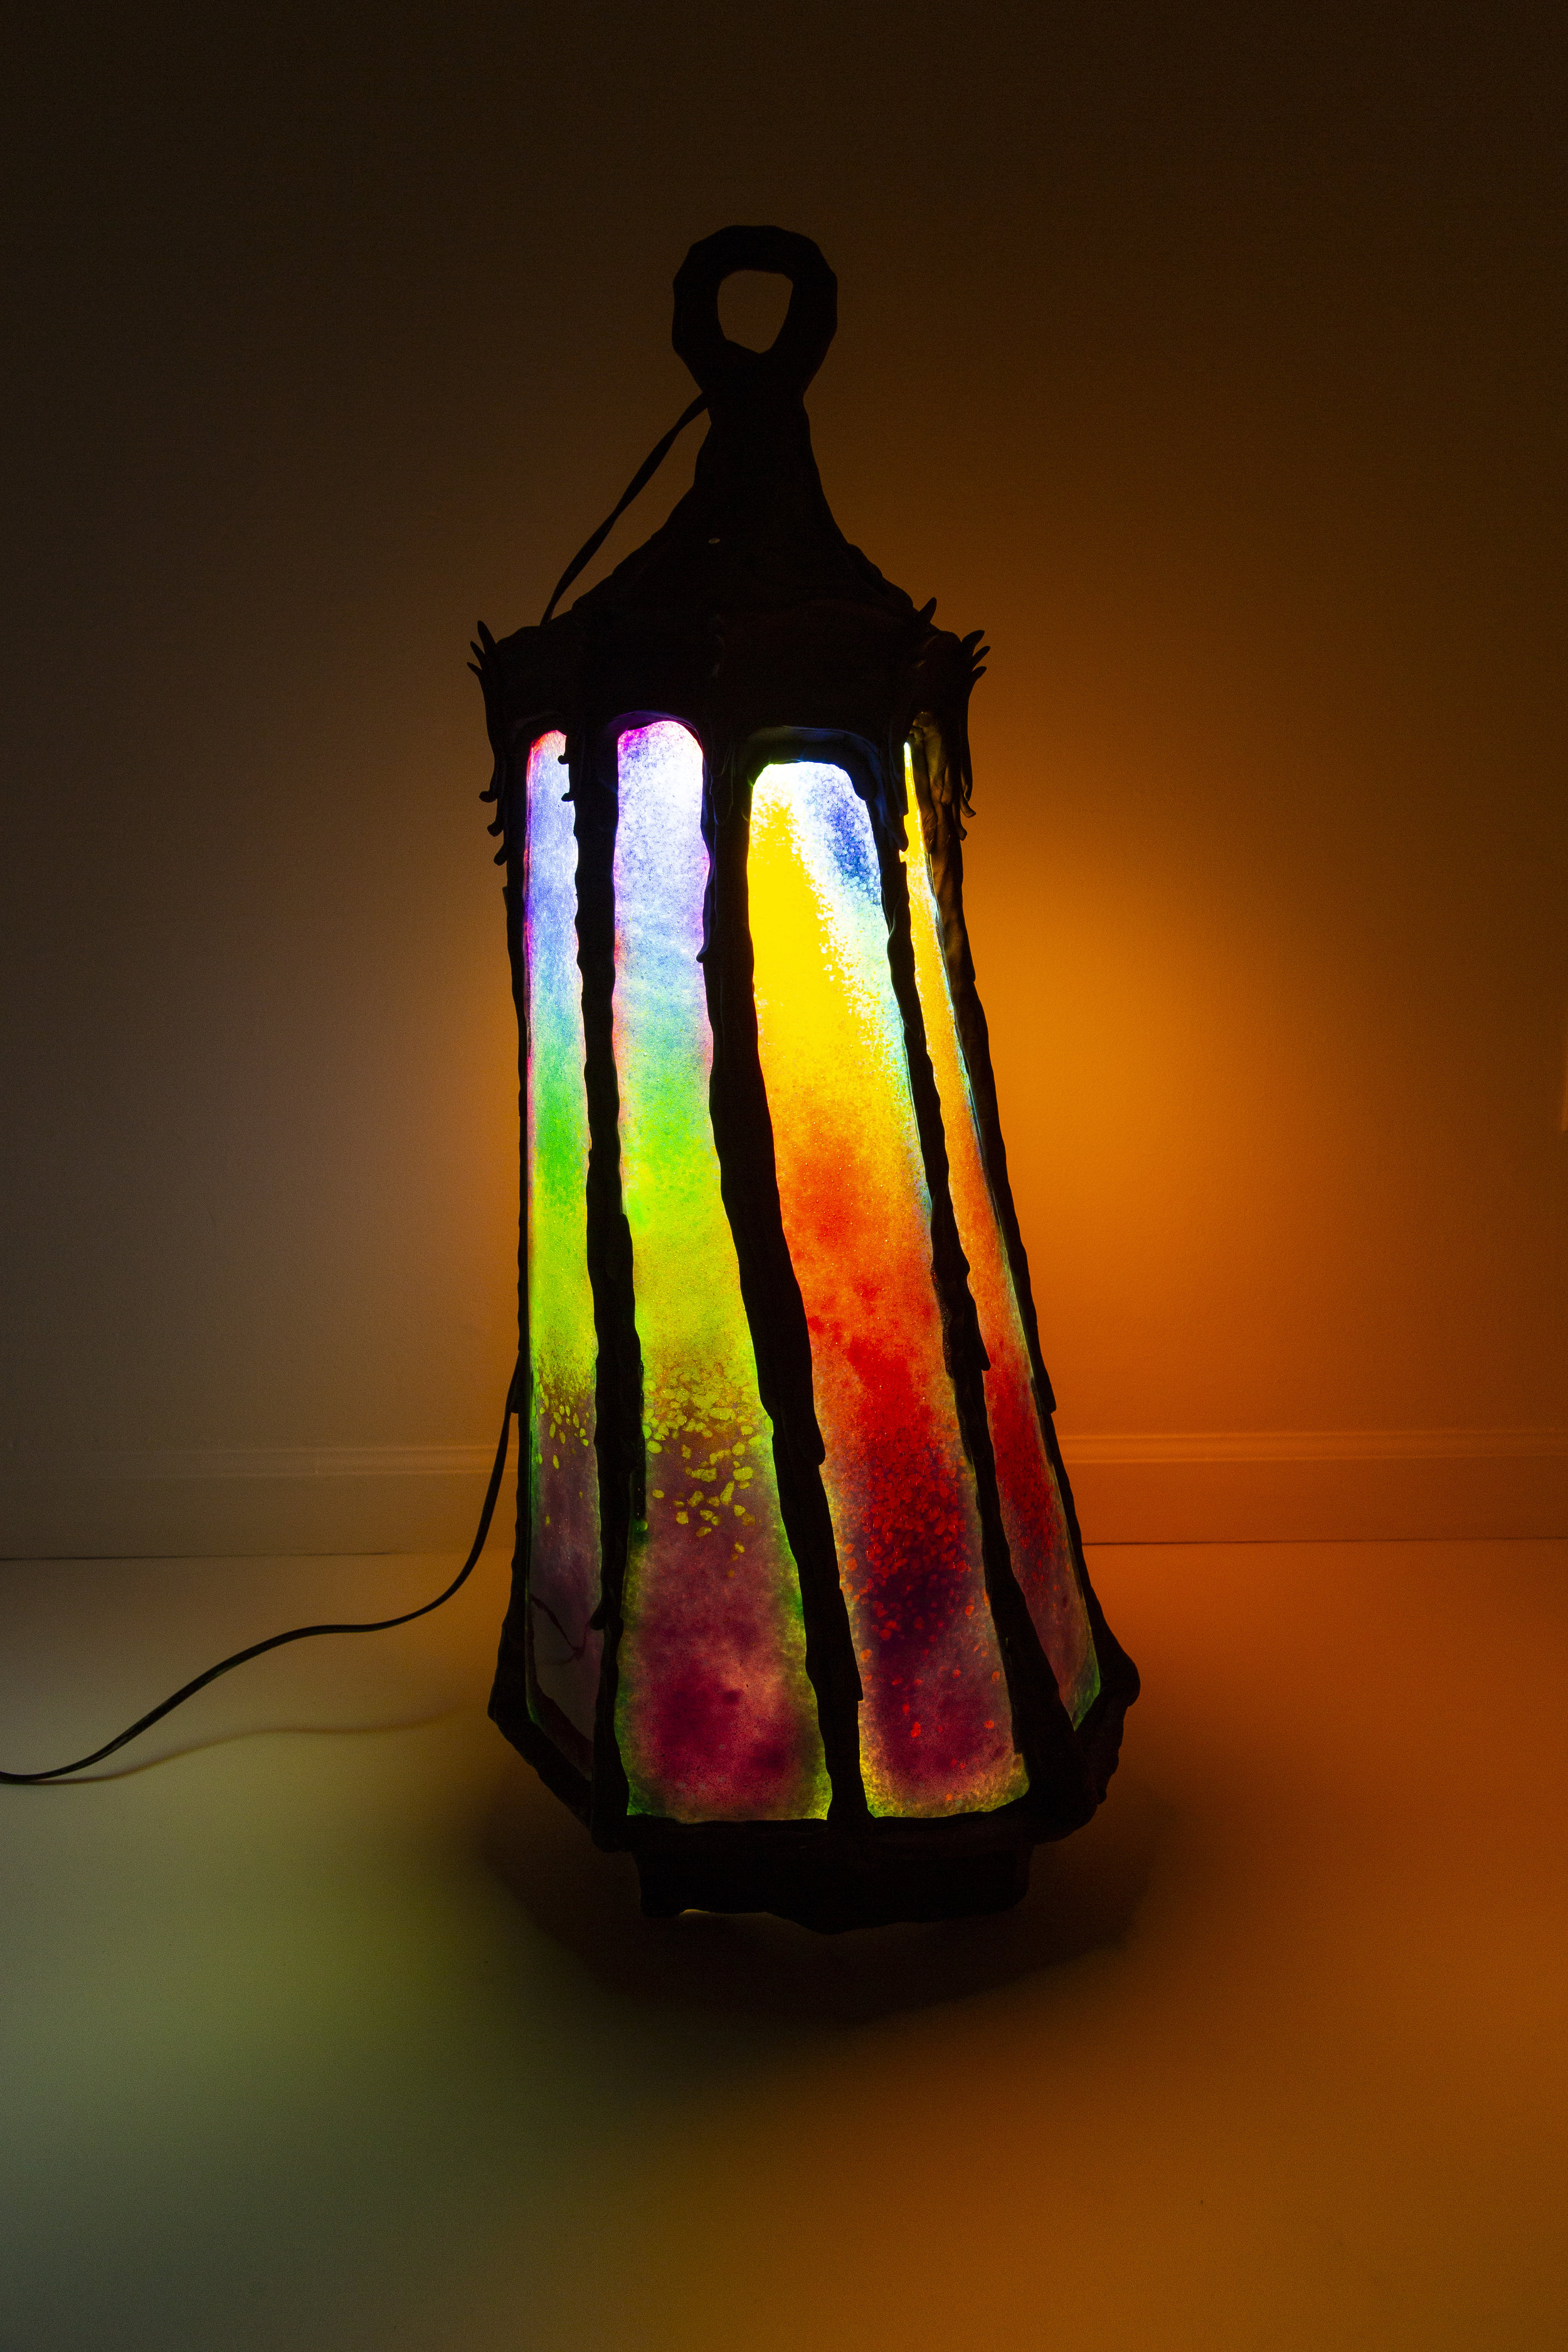  Dani Tull  Lantern 2, 2019  Mixed materials and fused-glass  31 x 17 x 17” 